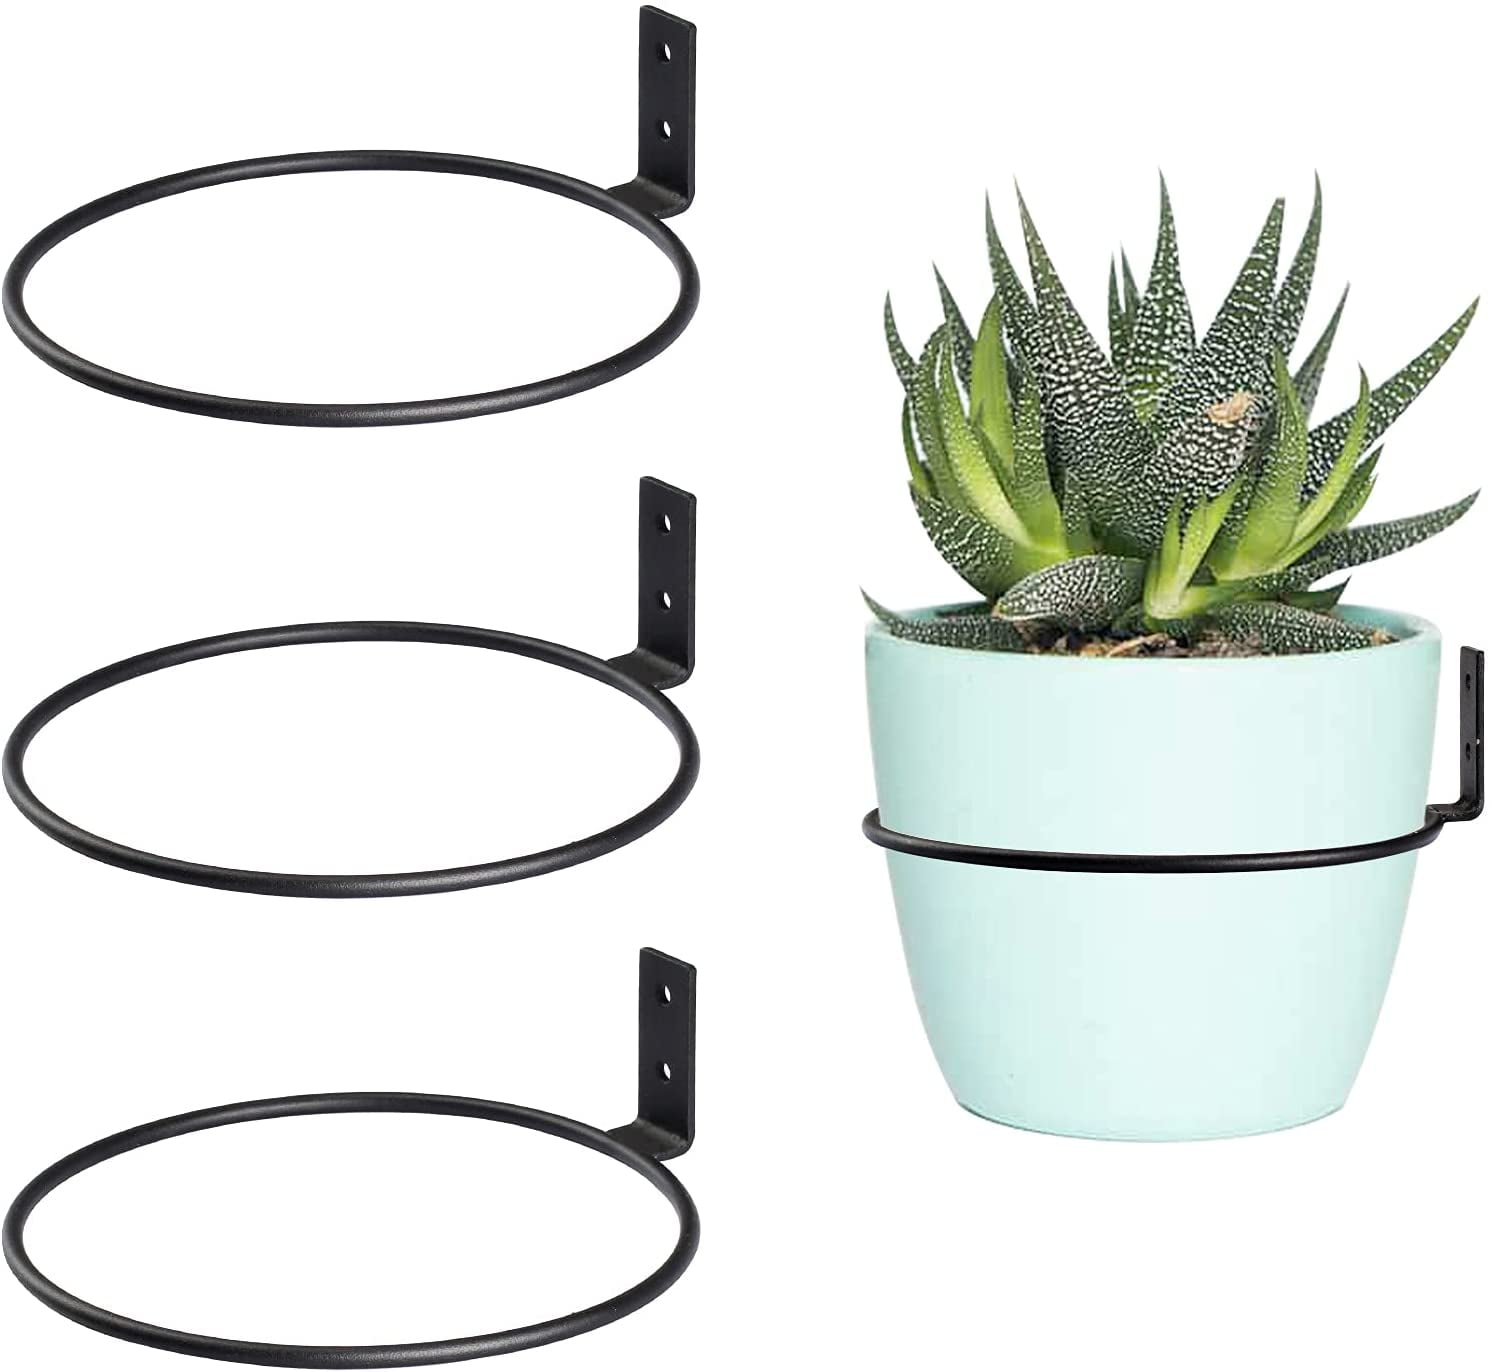 Casewin Plant Holder Ring 5 Inch Wall Mounted, 3 Pack Flower Pot Hangers  Metal Plant Stand Hanging Bracket Basket Hooks 